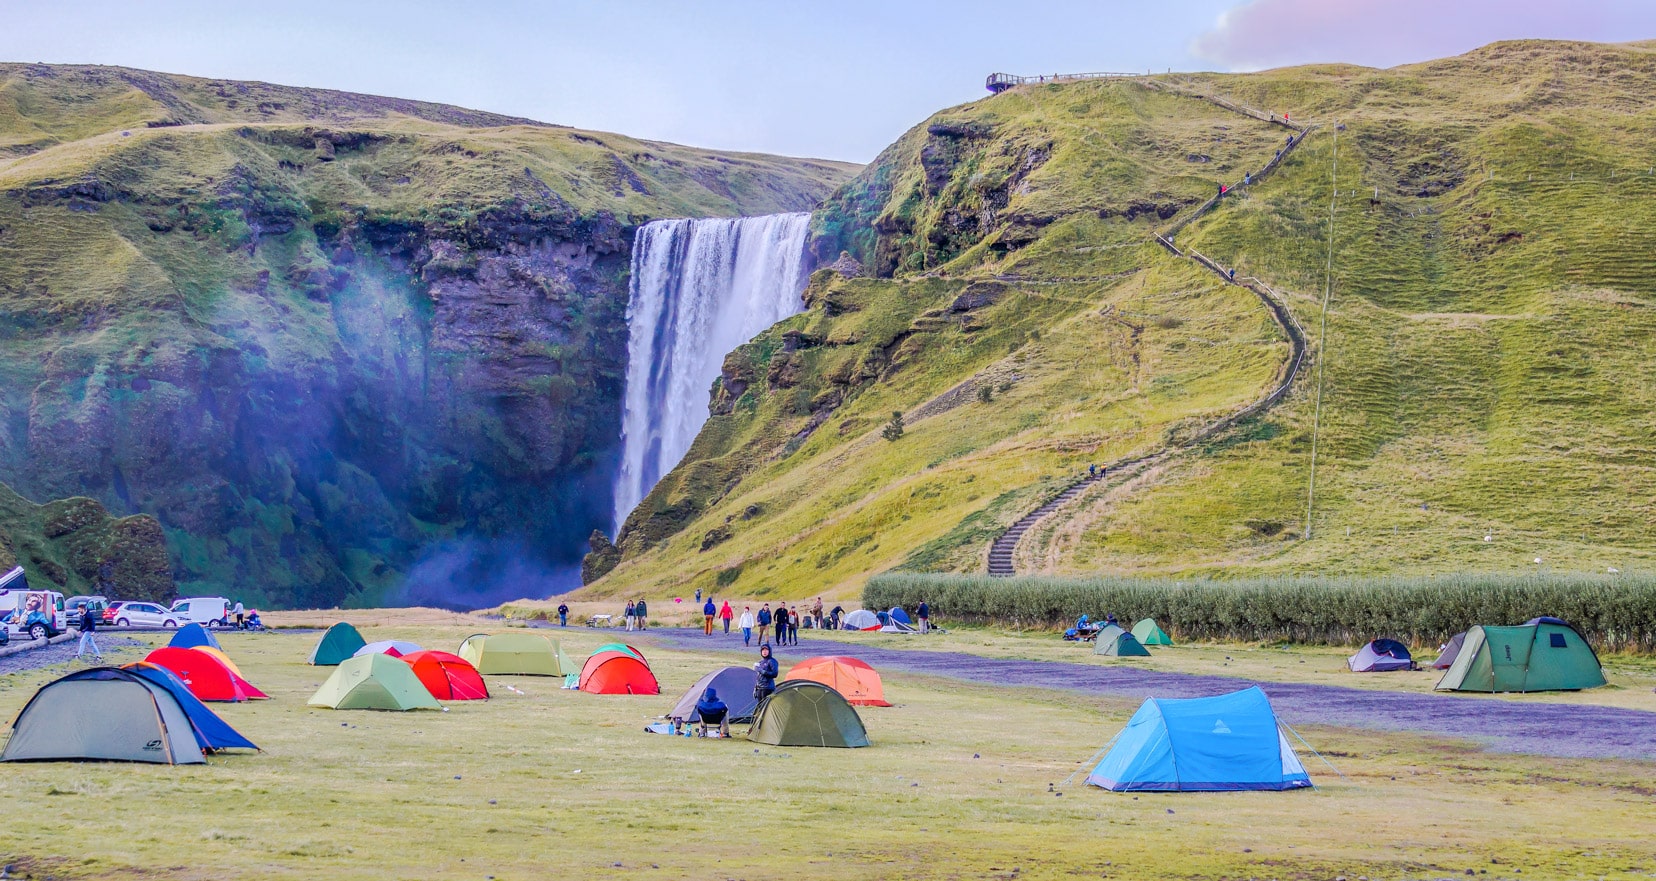 tents near a waterfall base in Iceland